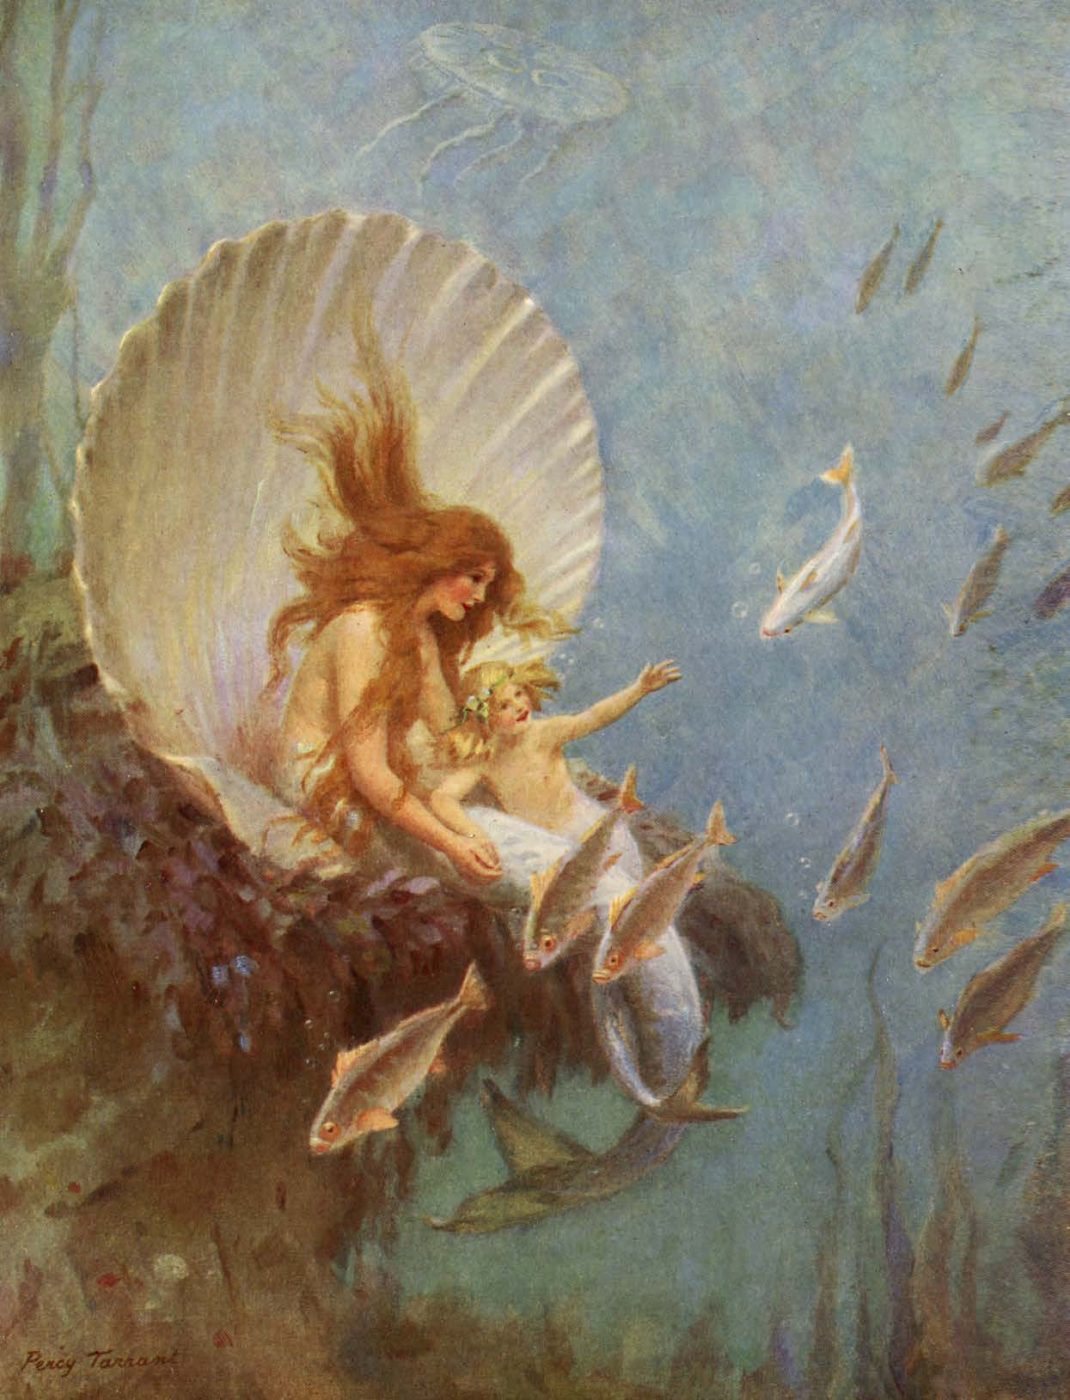 Telling Tails Throughout History: Mermaids and Sirens